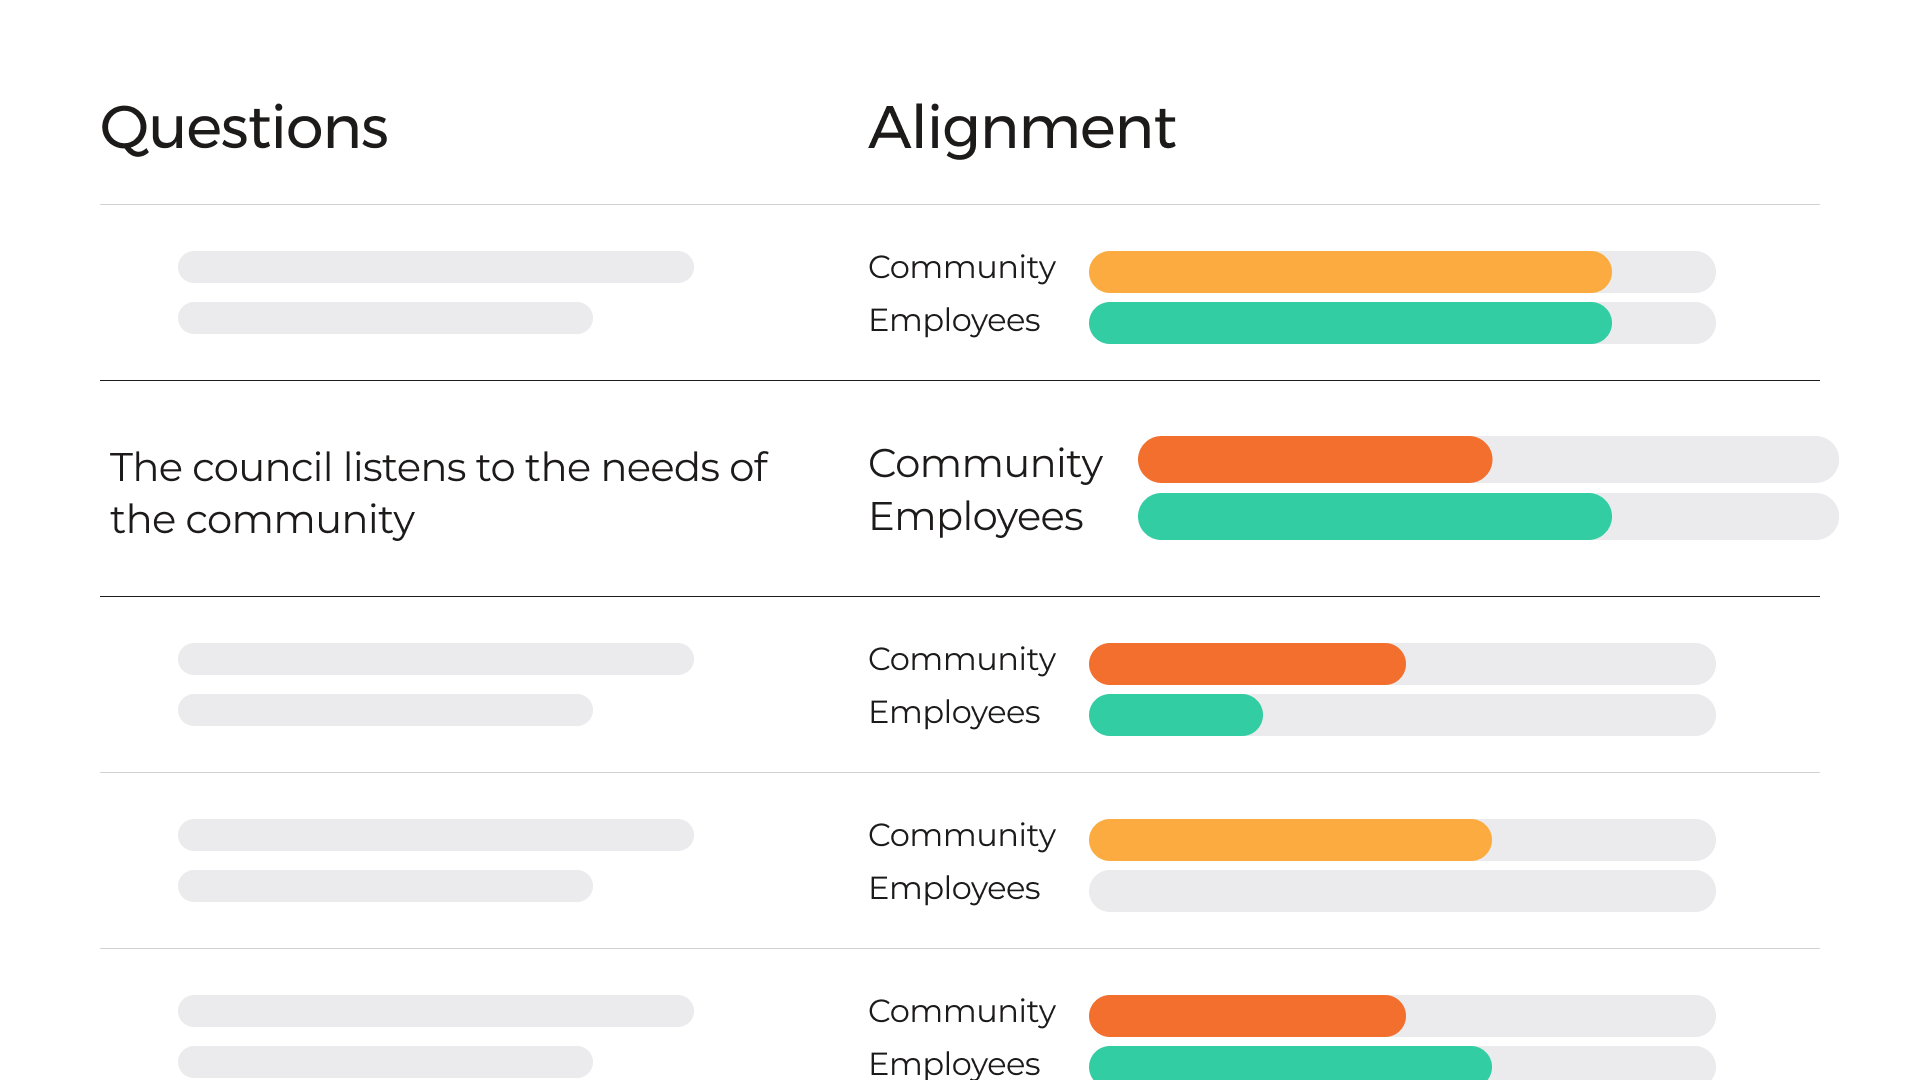 Compare community and employee survey results